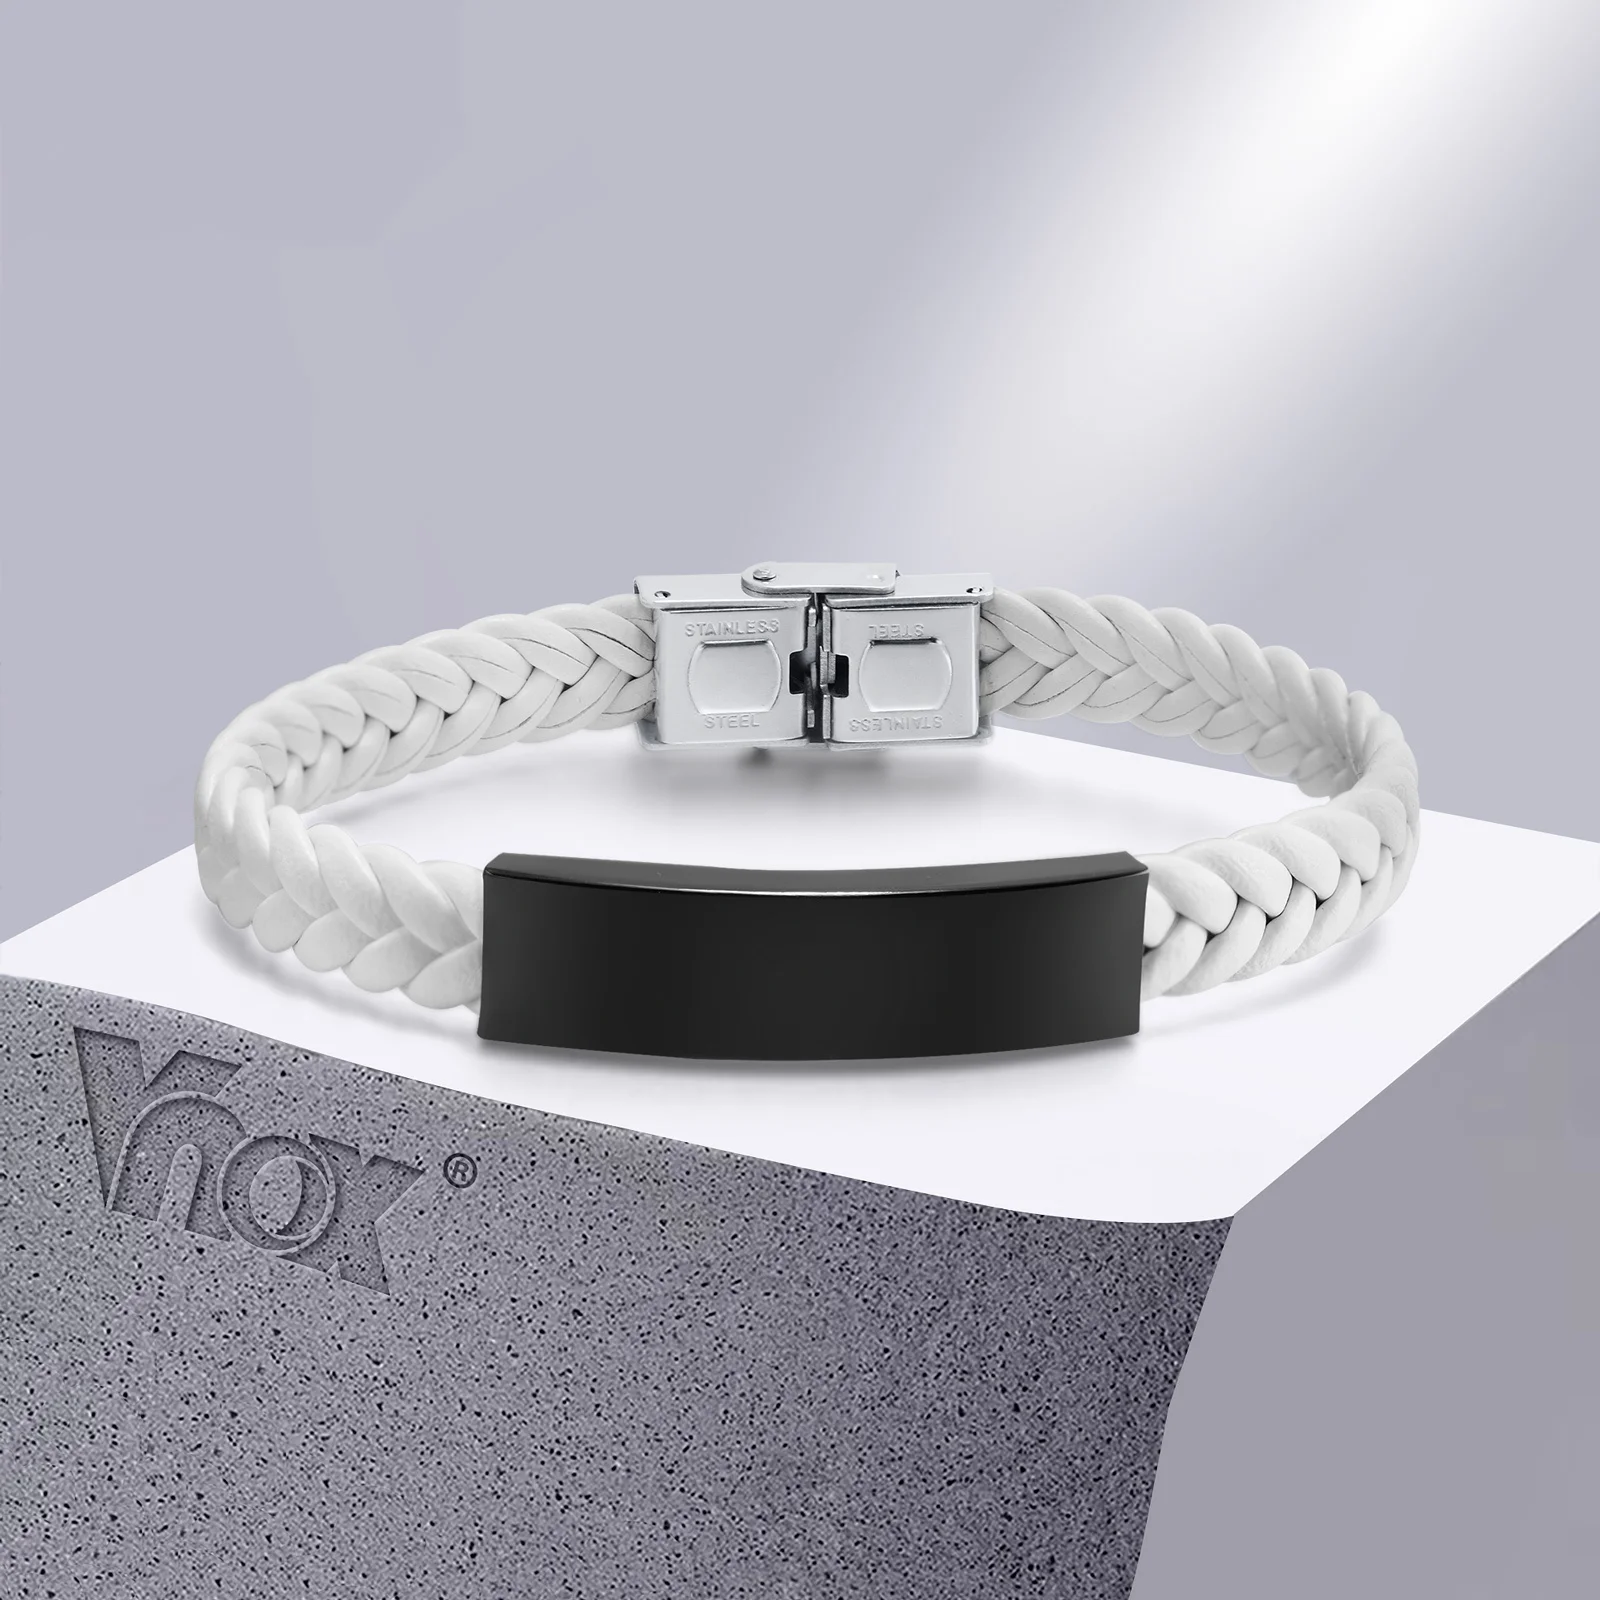 

Vnox Free Personalized Stainless Steel ID Tag Bracelets for Men,Handmade Leather Cord Wristband Custom Birthday Gift to Him